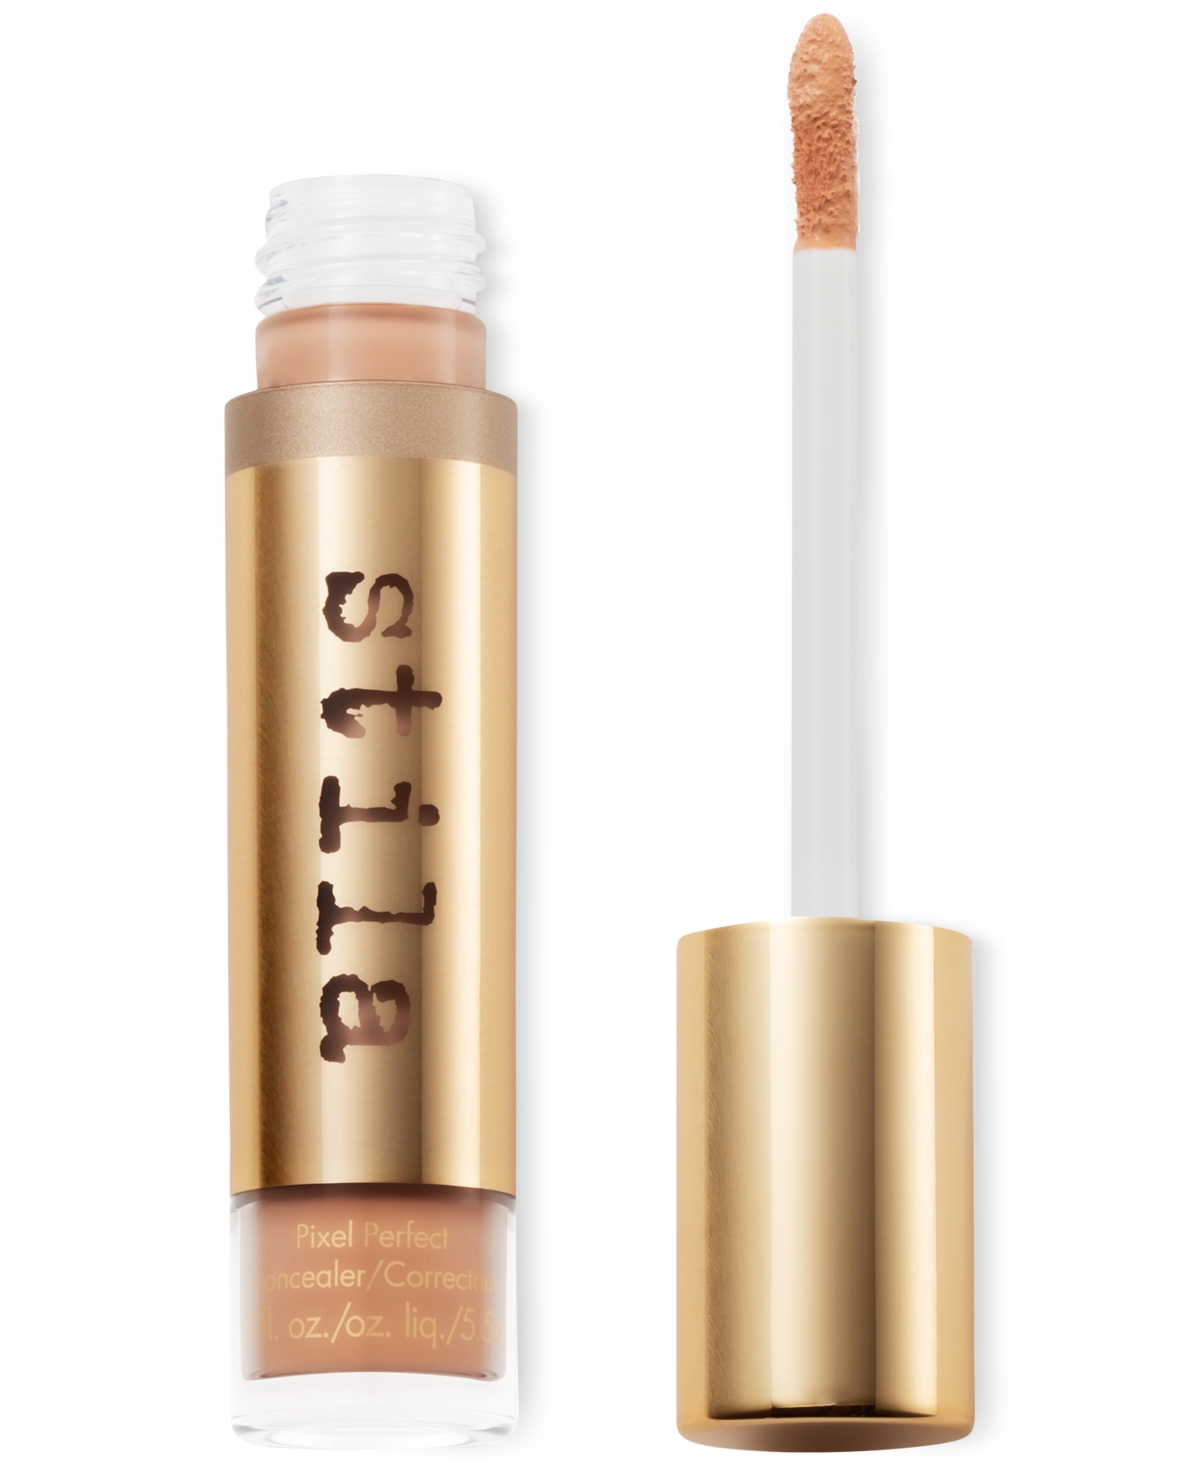 Stila Pixel Perfect Concealer In Shade  - Light With Subtle Peach Underto